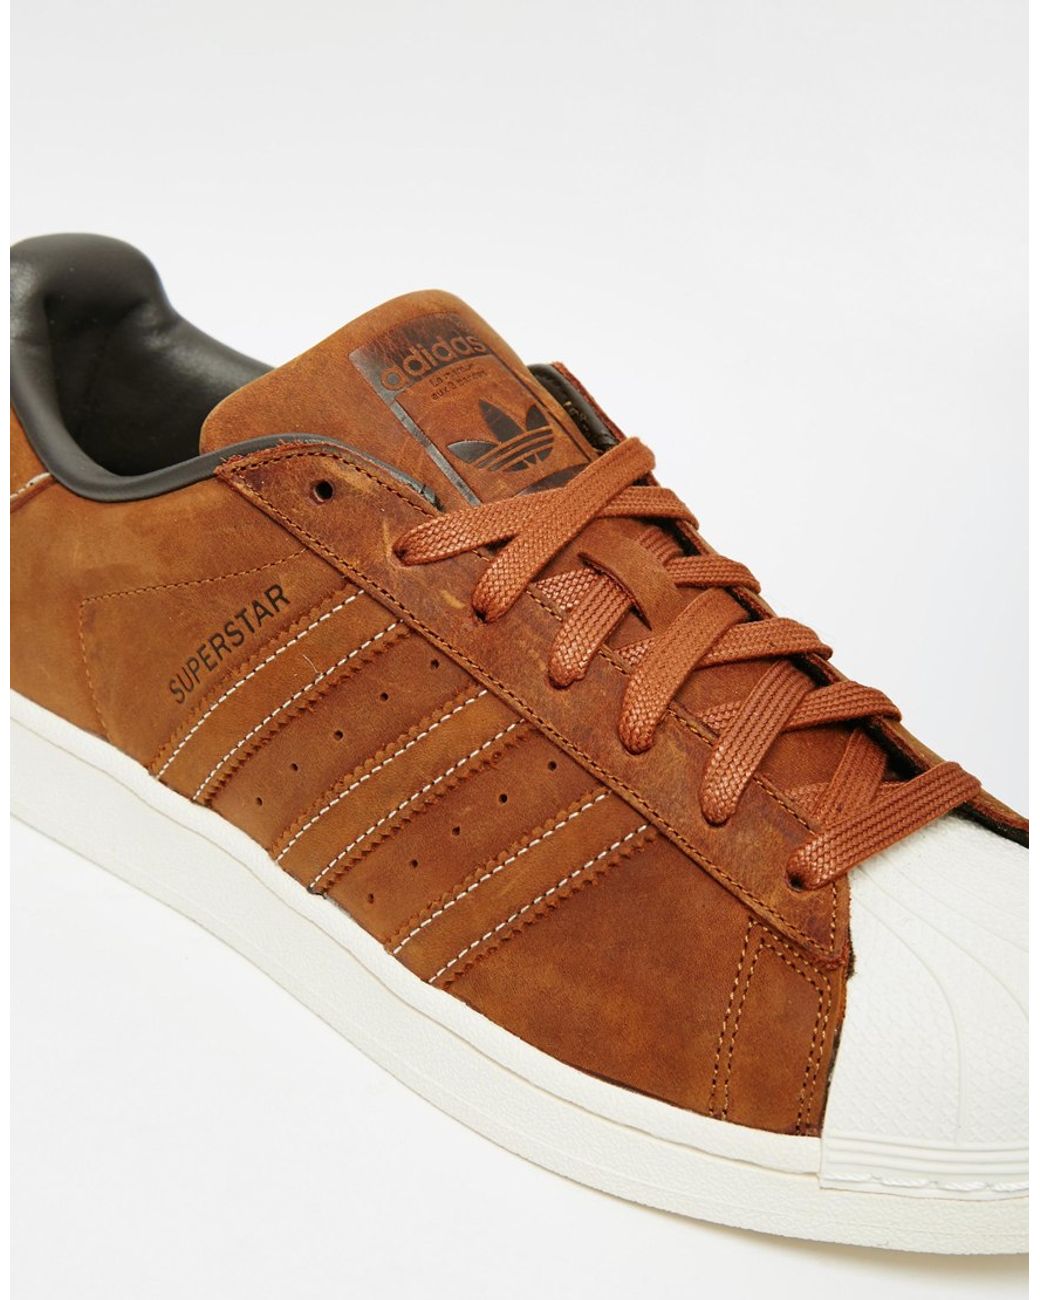 adidas Originals Superstar Waxed Leather Trainers S79471 in Men Lyst